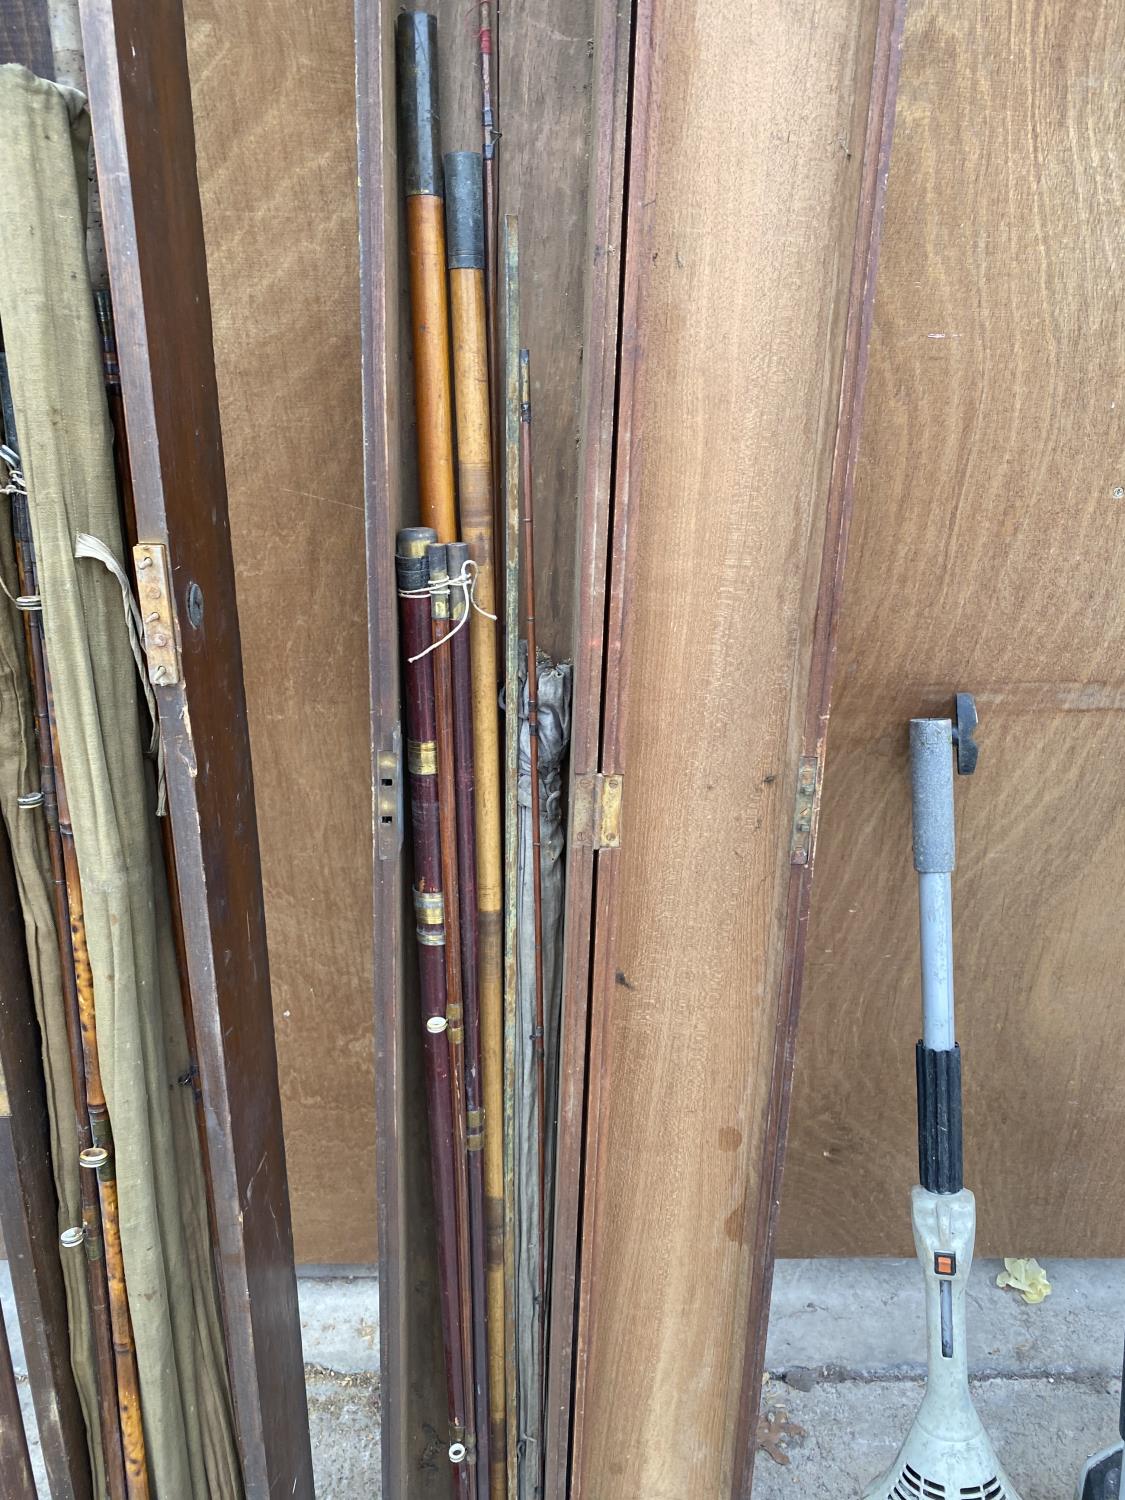 TWO VINTAGE WOODEN STORAGE CASES WITH AN ASSORTMENT OF FISHING RODS TO INCLUDE SPLIT CANES ETC - Image 2 of 4